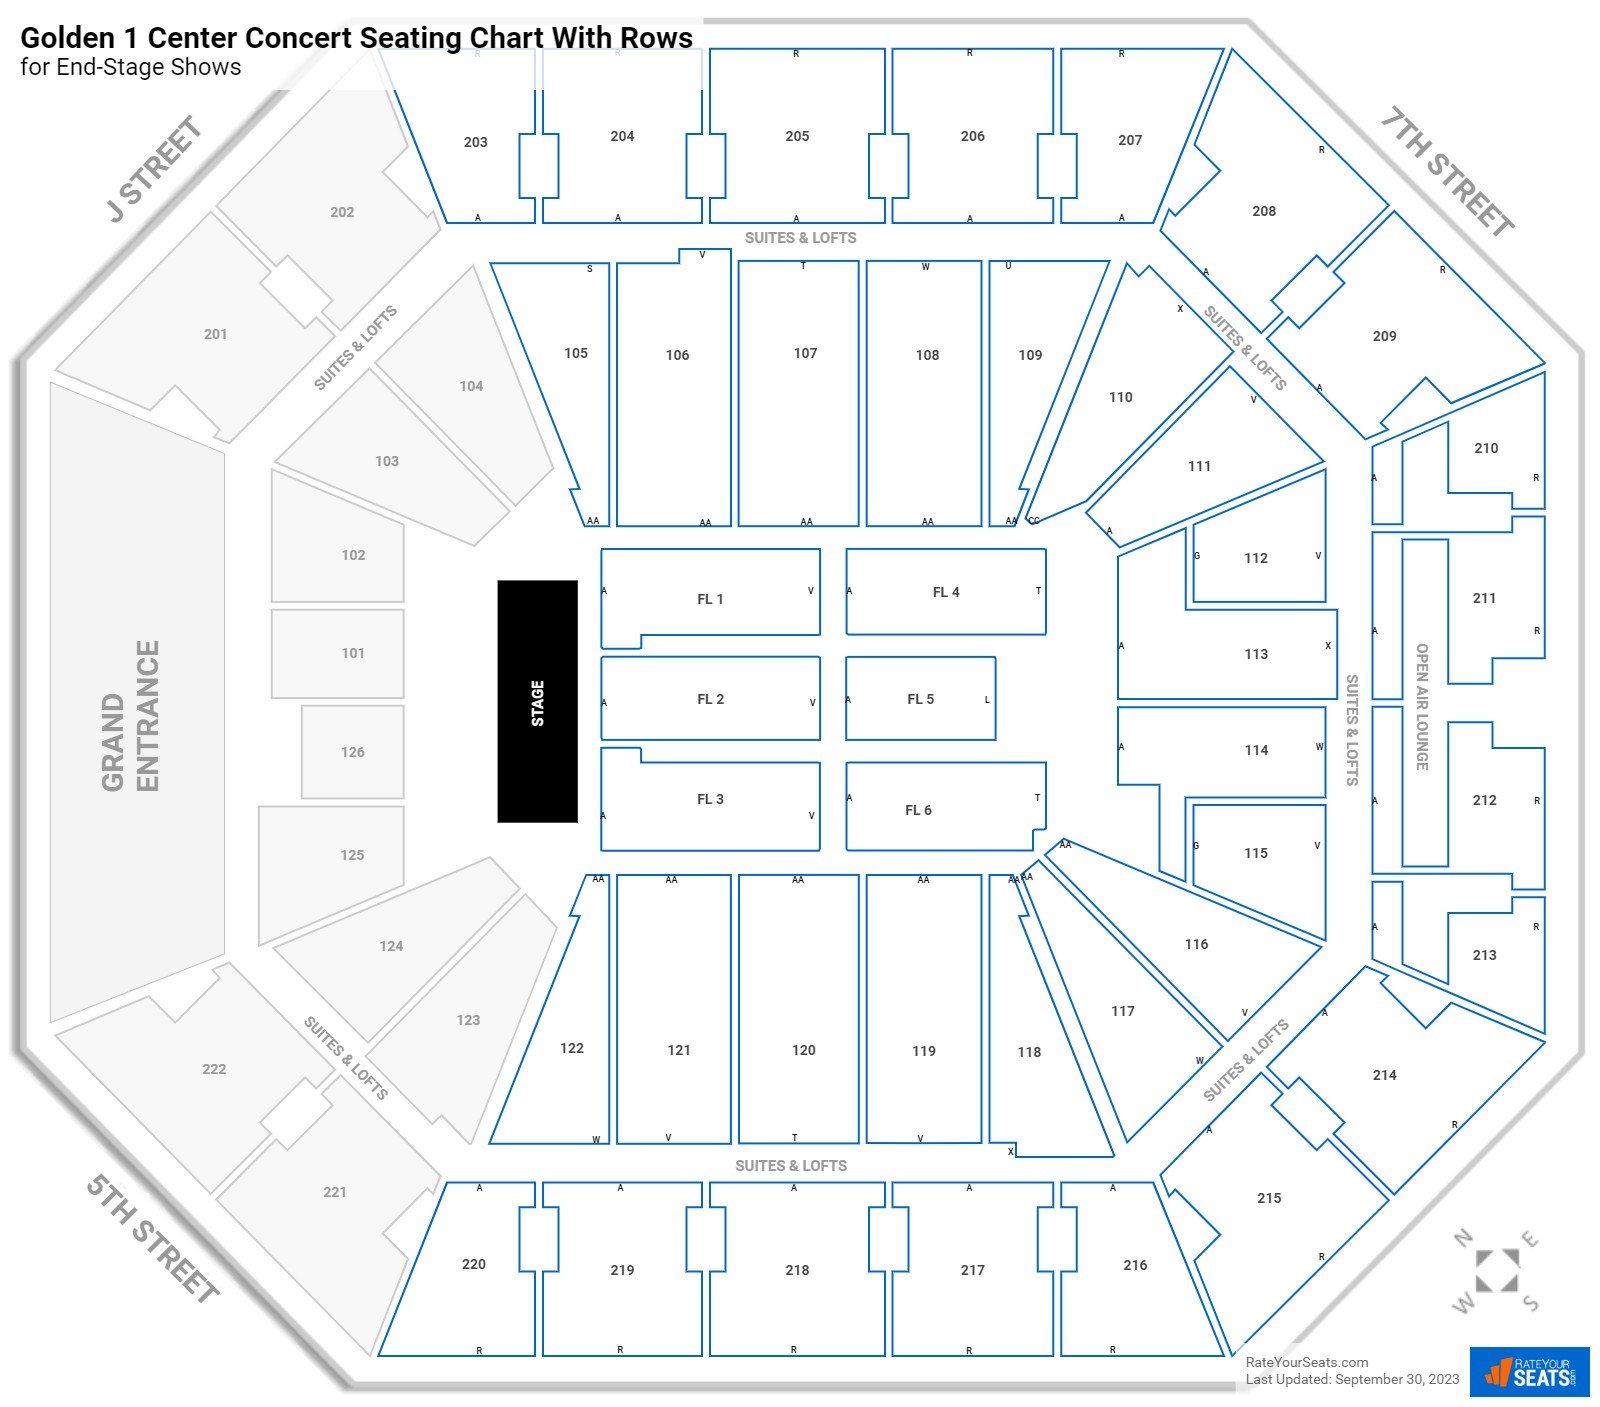 Golden 1 Center seating chart with row numbers